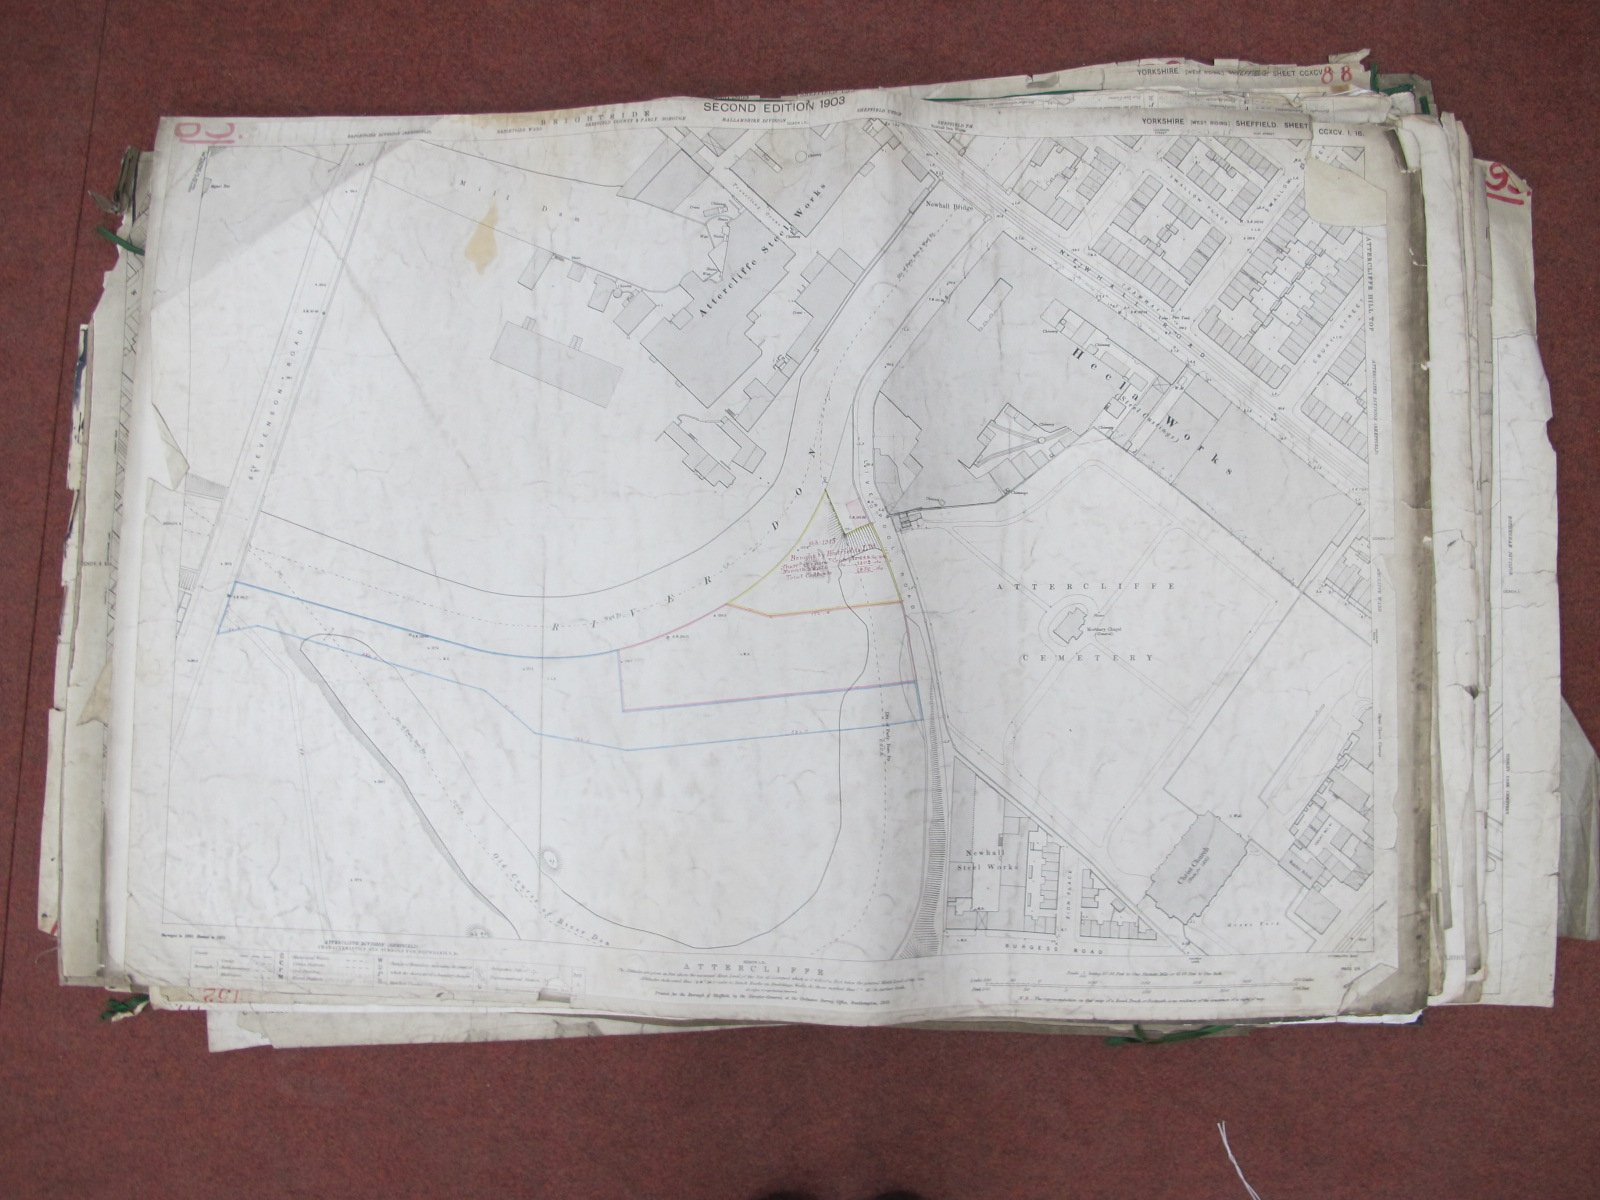 Sheffield North Maps, Attercliffe, Brightside - some dates noted 1890, 1893, 1903, dirty, some tears - Image 5 of 10